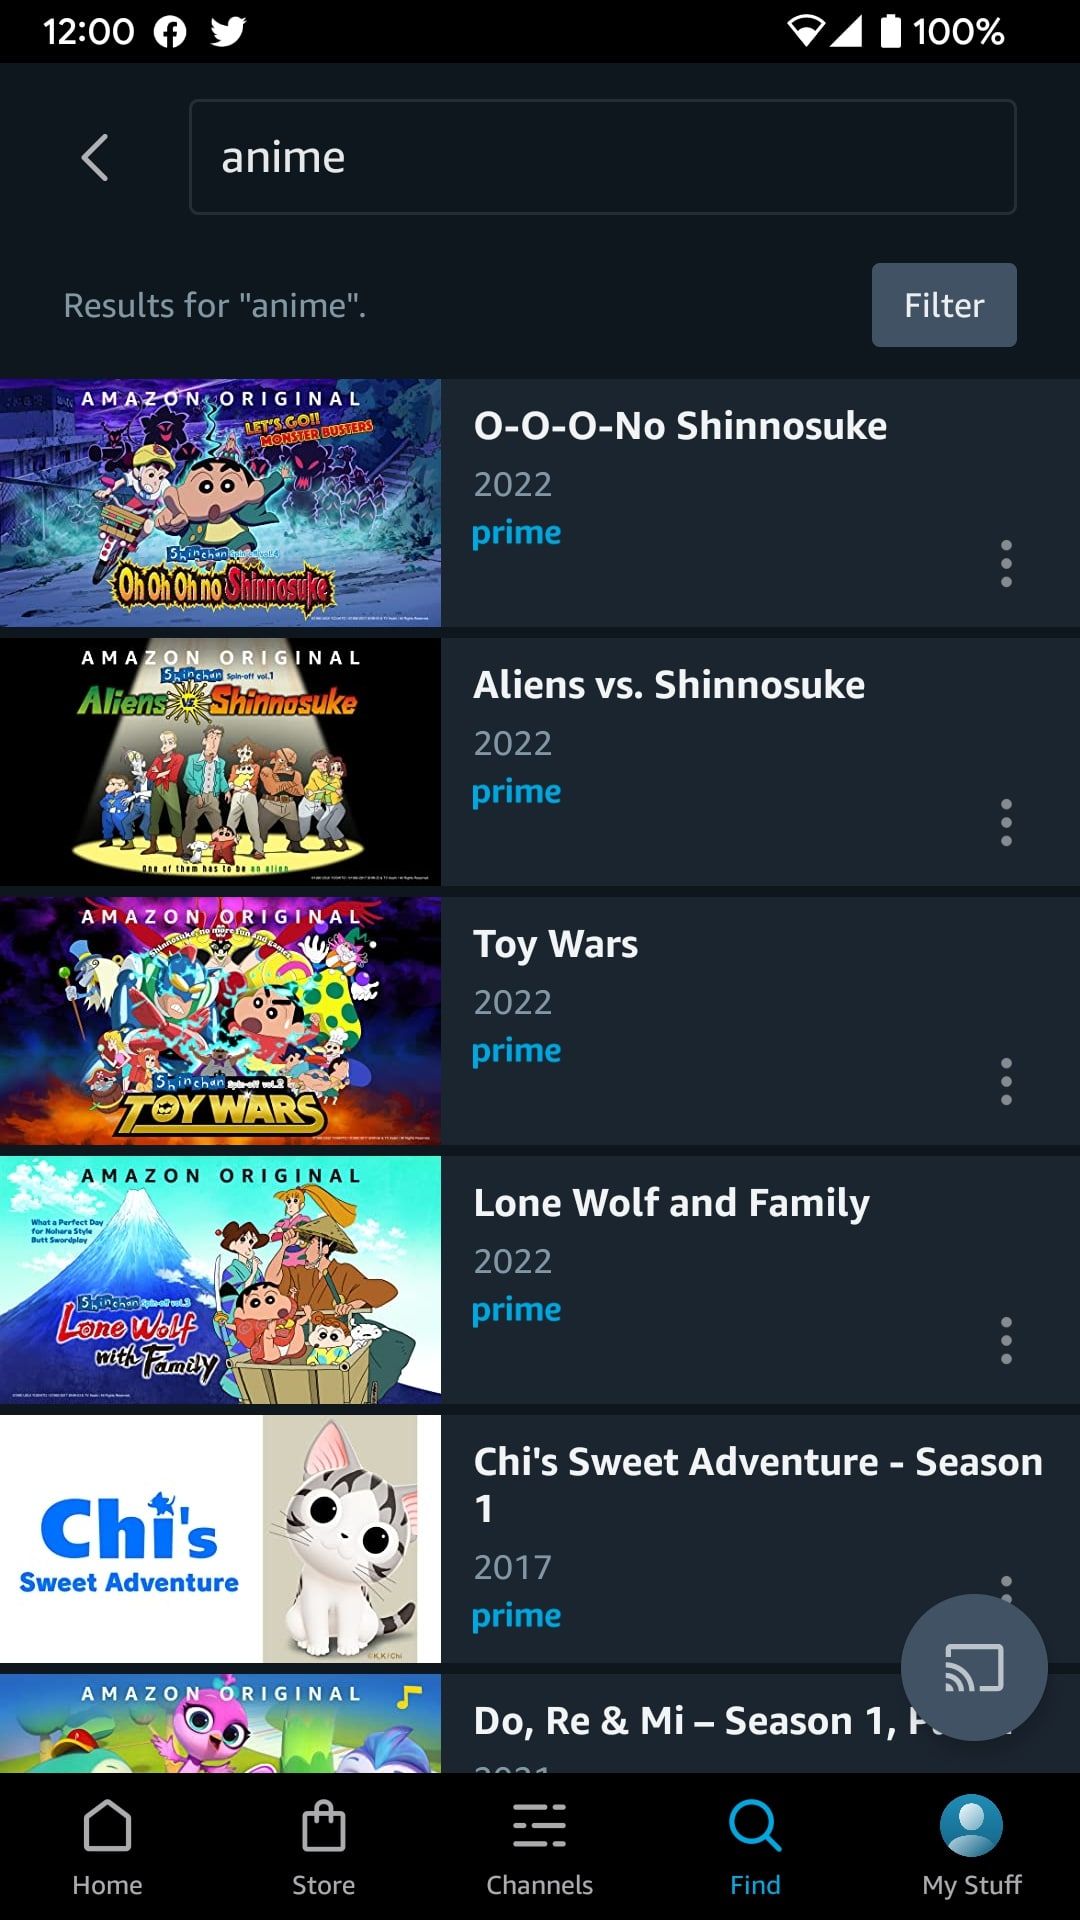 Anime Search Results in Prime Video app